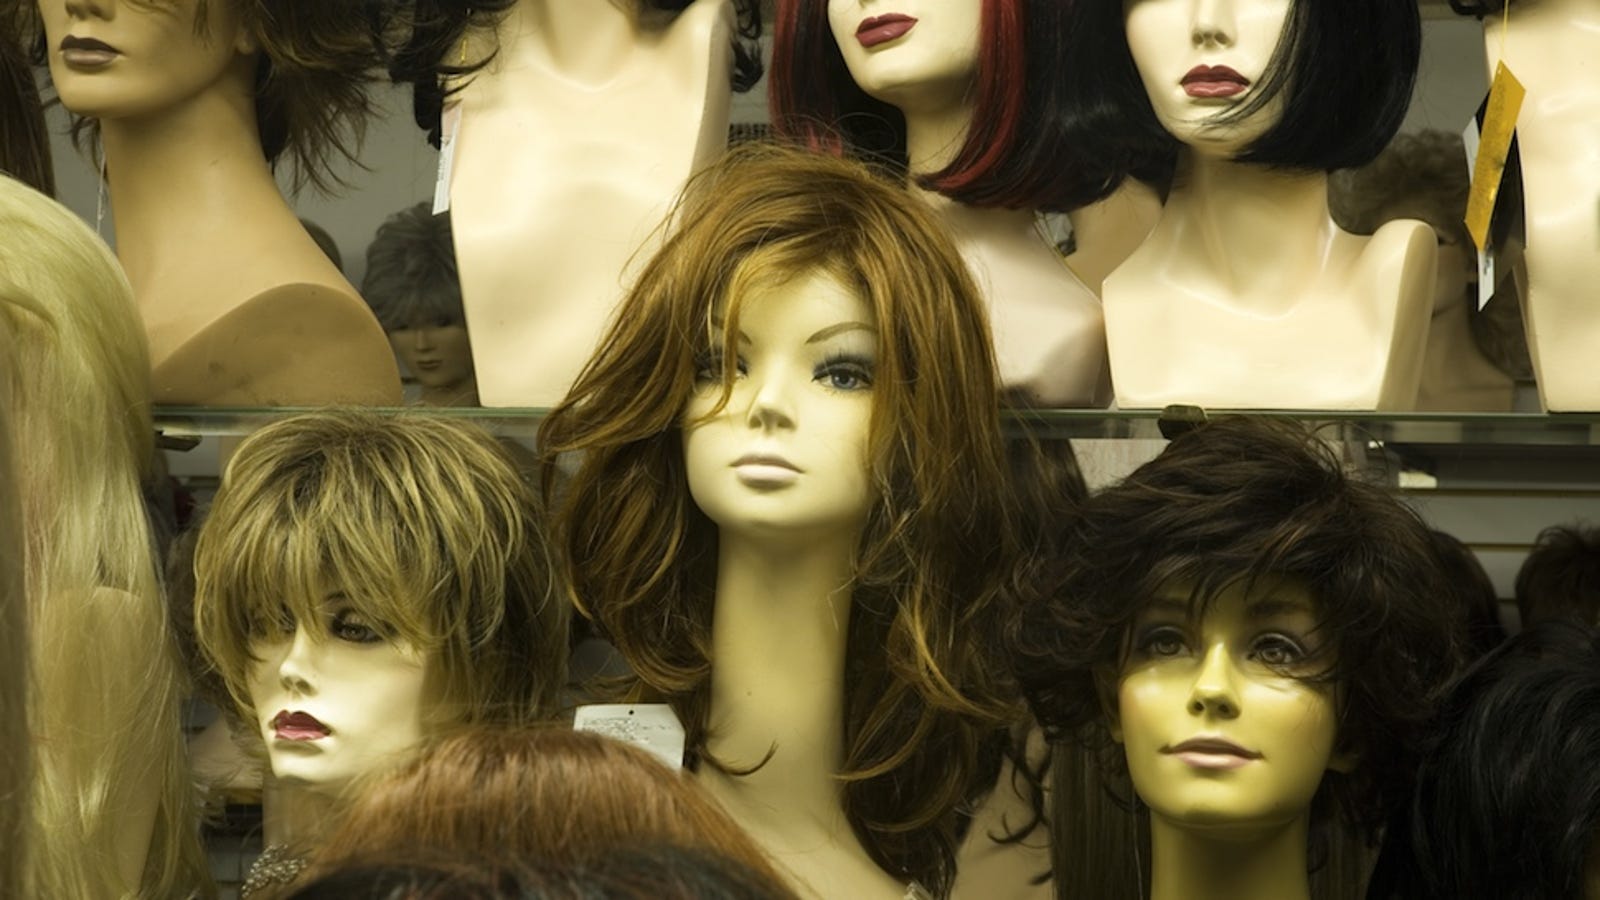 Women Busted Smuggling Drugs Under Their Wigs